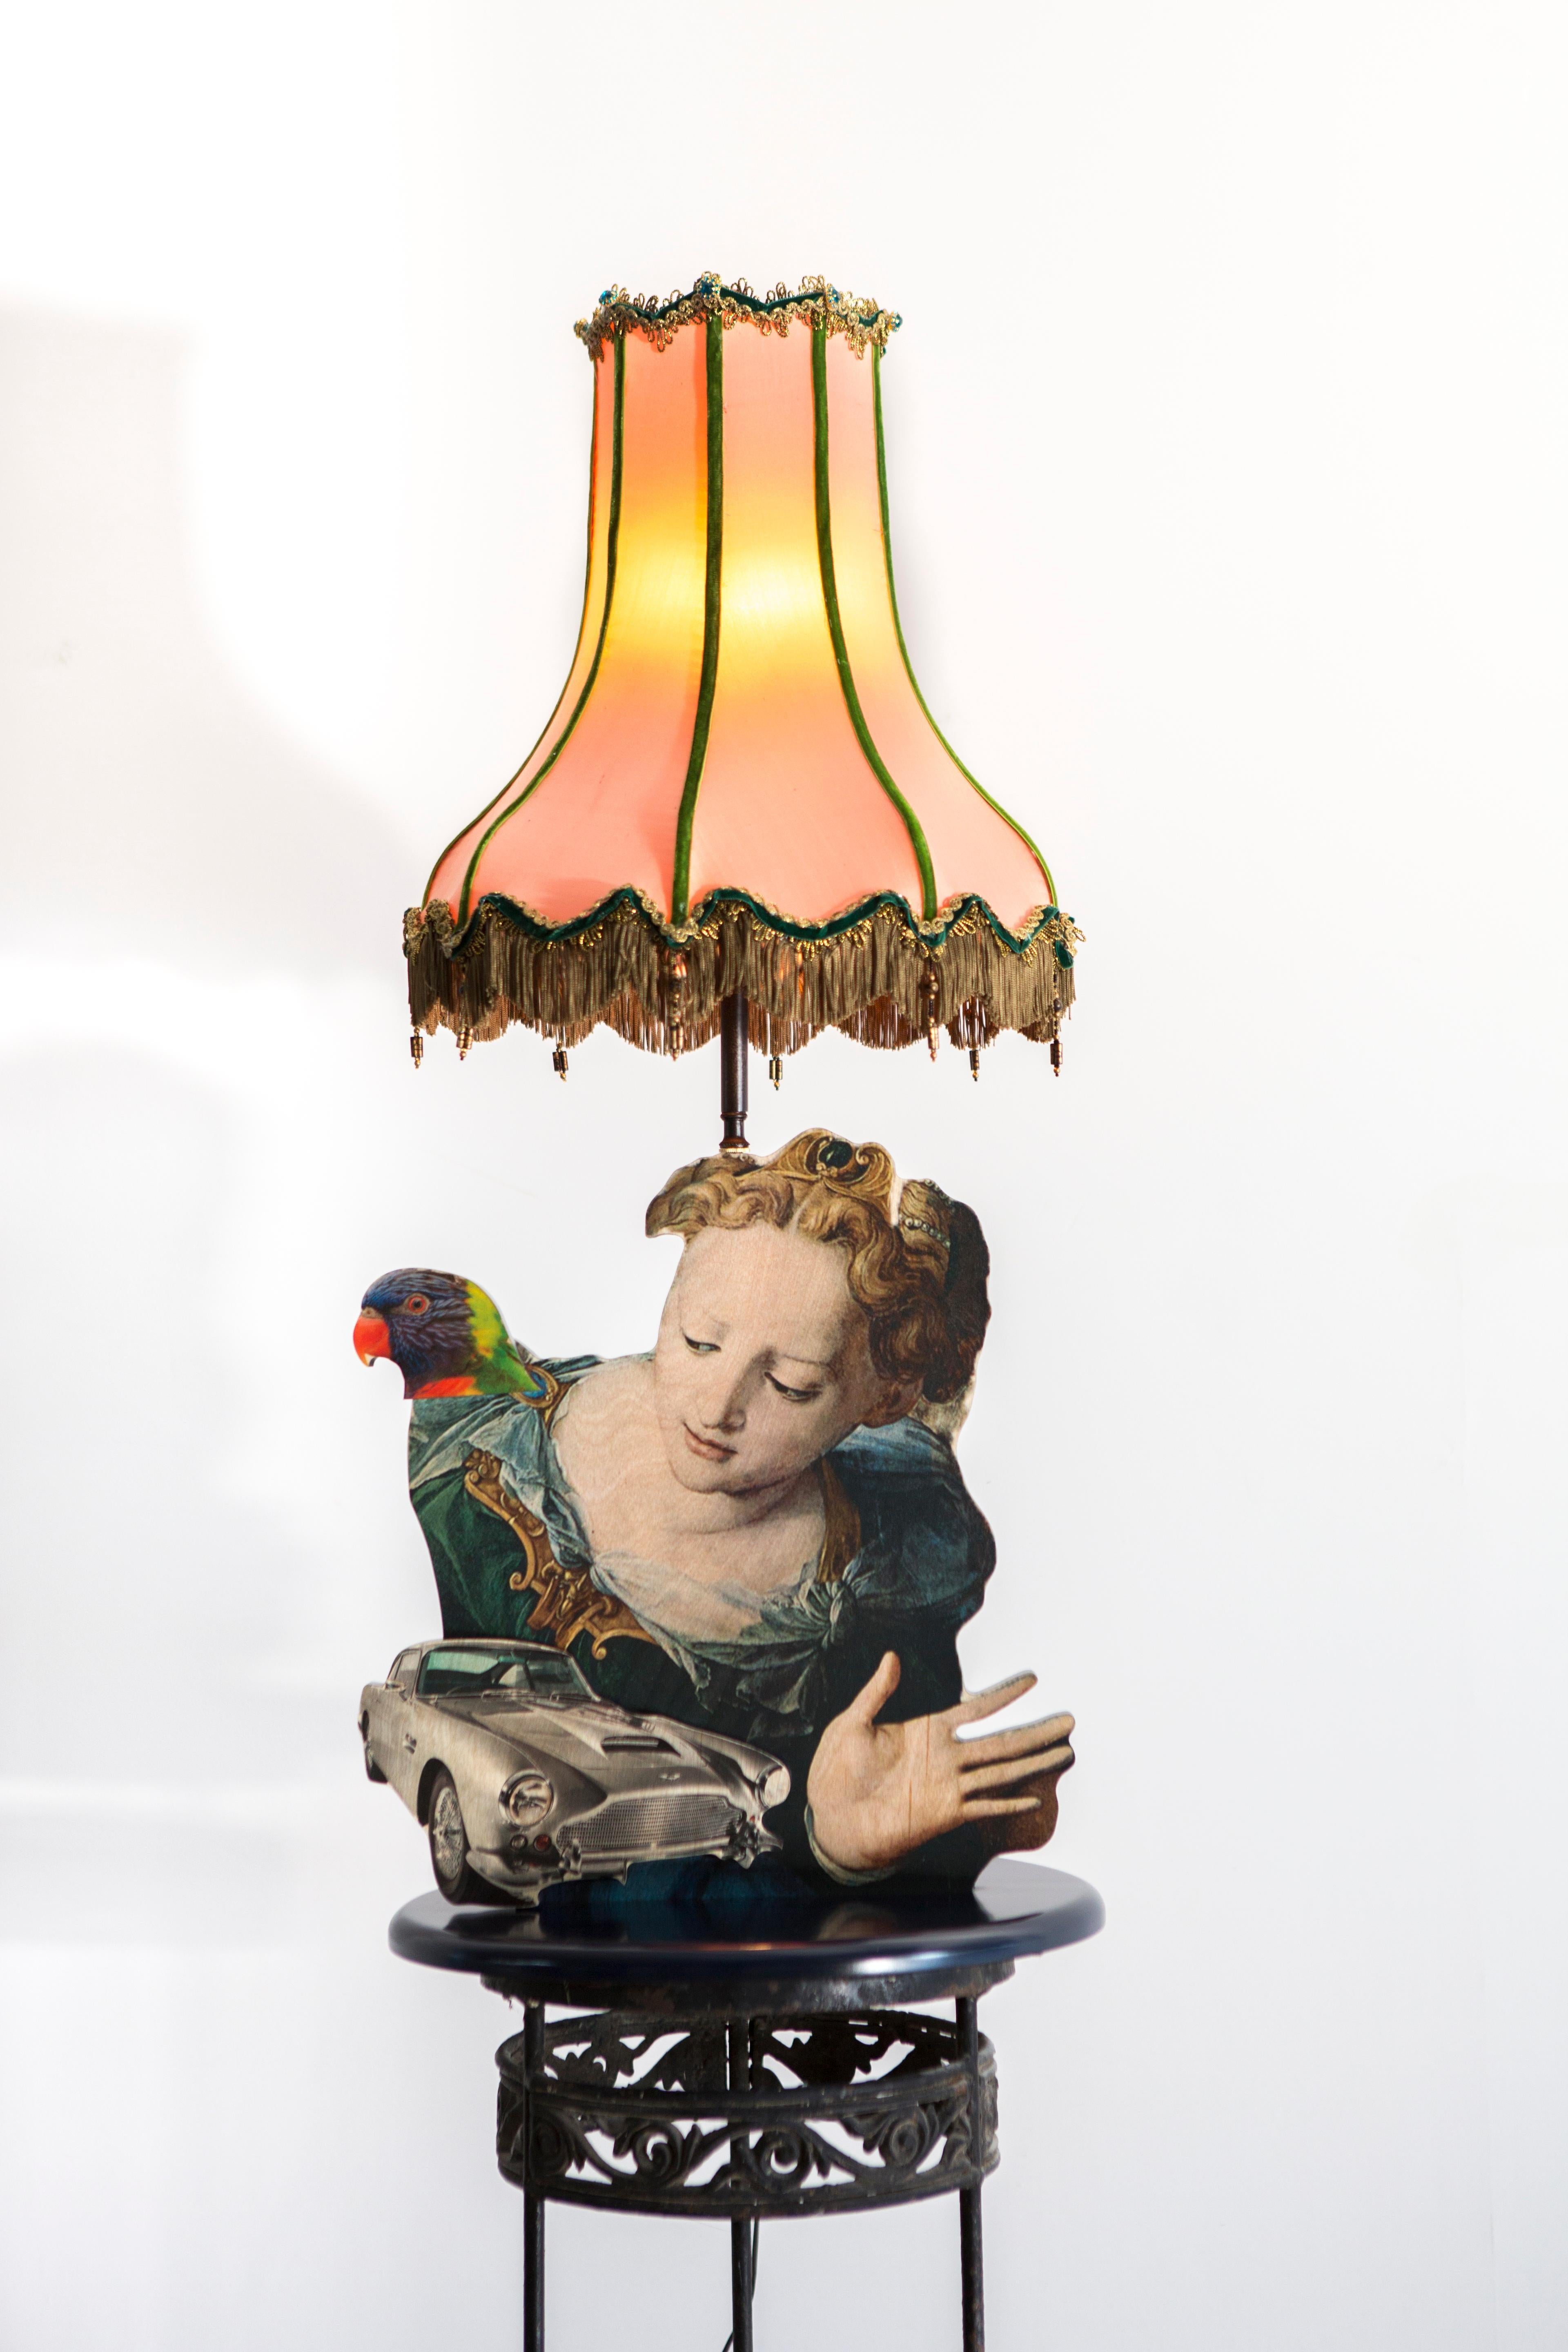 This sculptural table lamp from Mattia Biagi's Metropolitan Sets series expresses the personal investigation of the artist straddling life and death, nature and civilization, preservation and transformation. The images used to build the bodies of